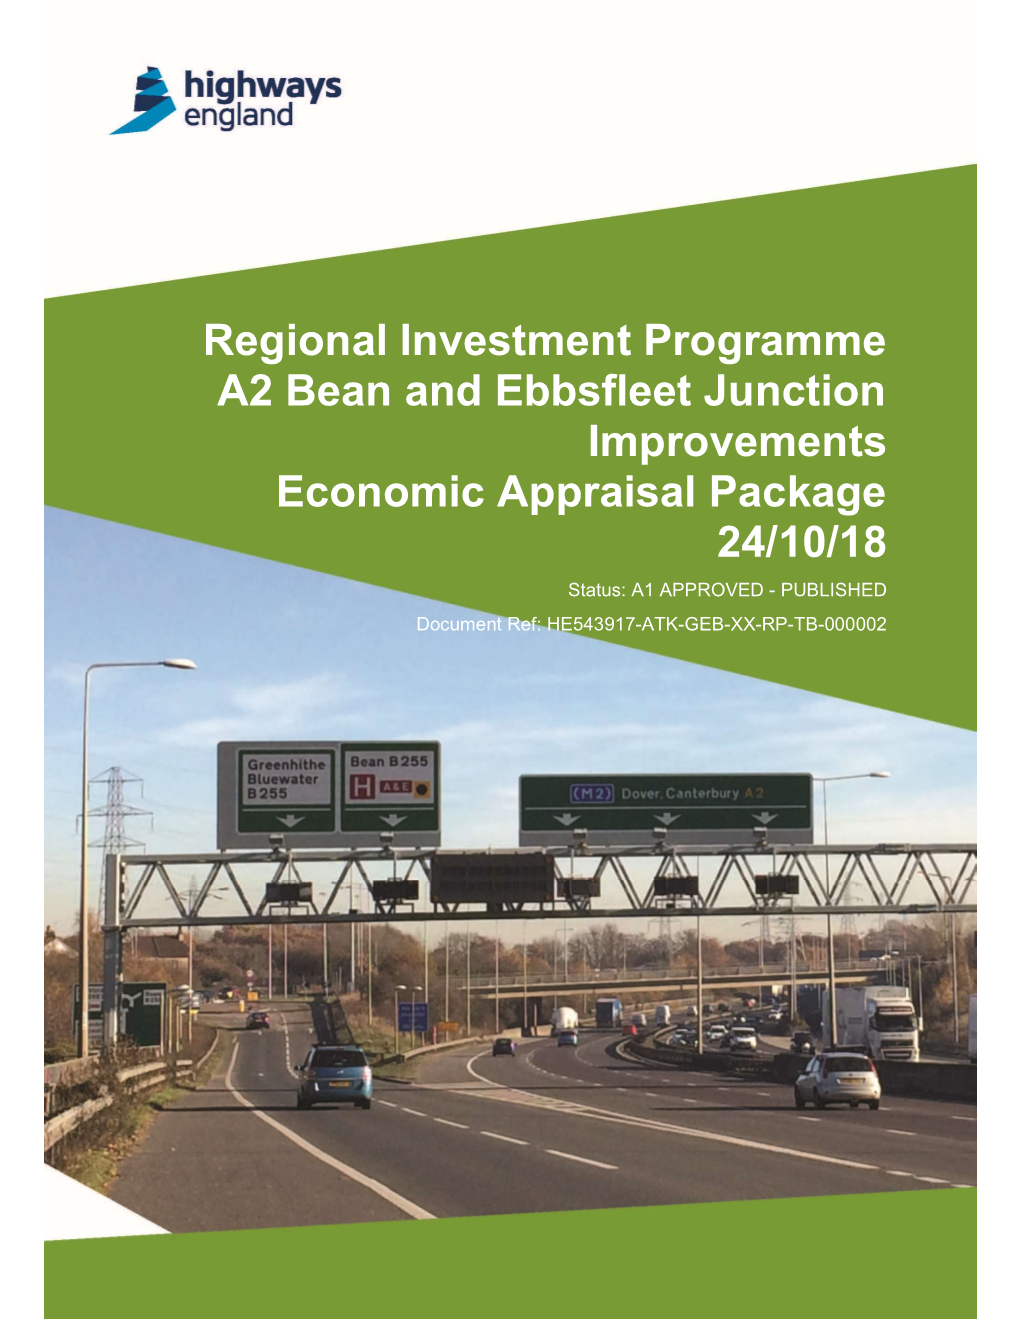 Regional Investment Programme A2 Bean and Ebbsfleet Junction Improvements Economic Appraisal Package 24/10/18